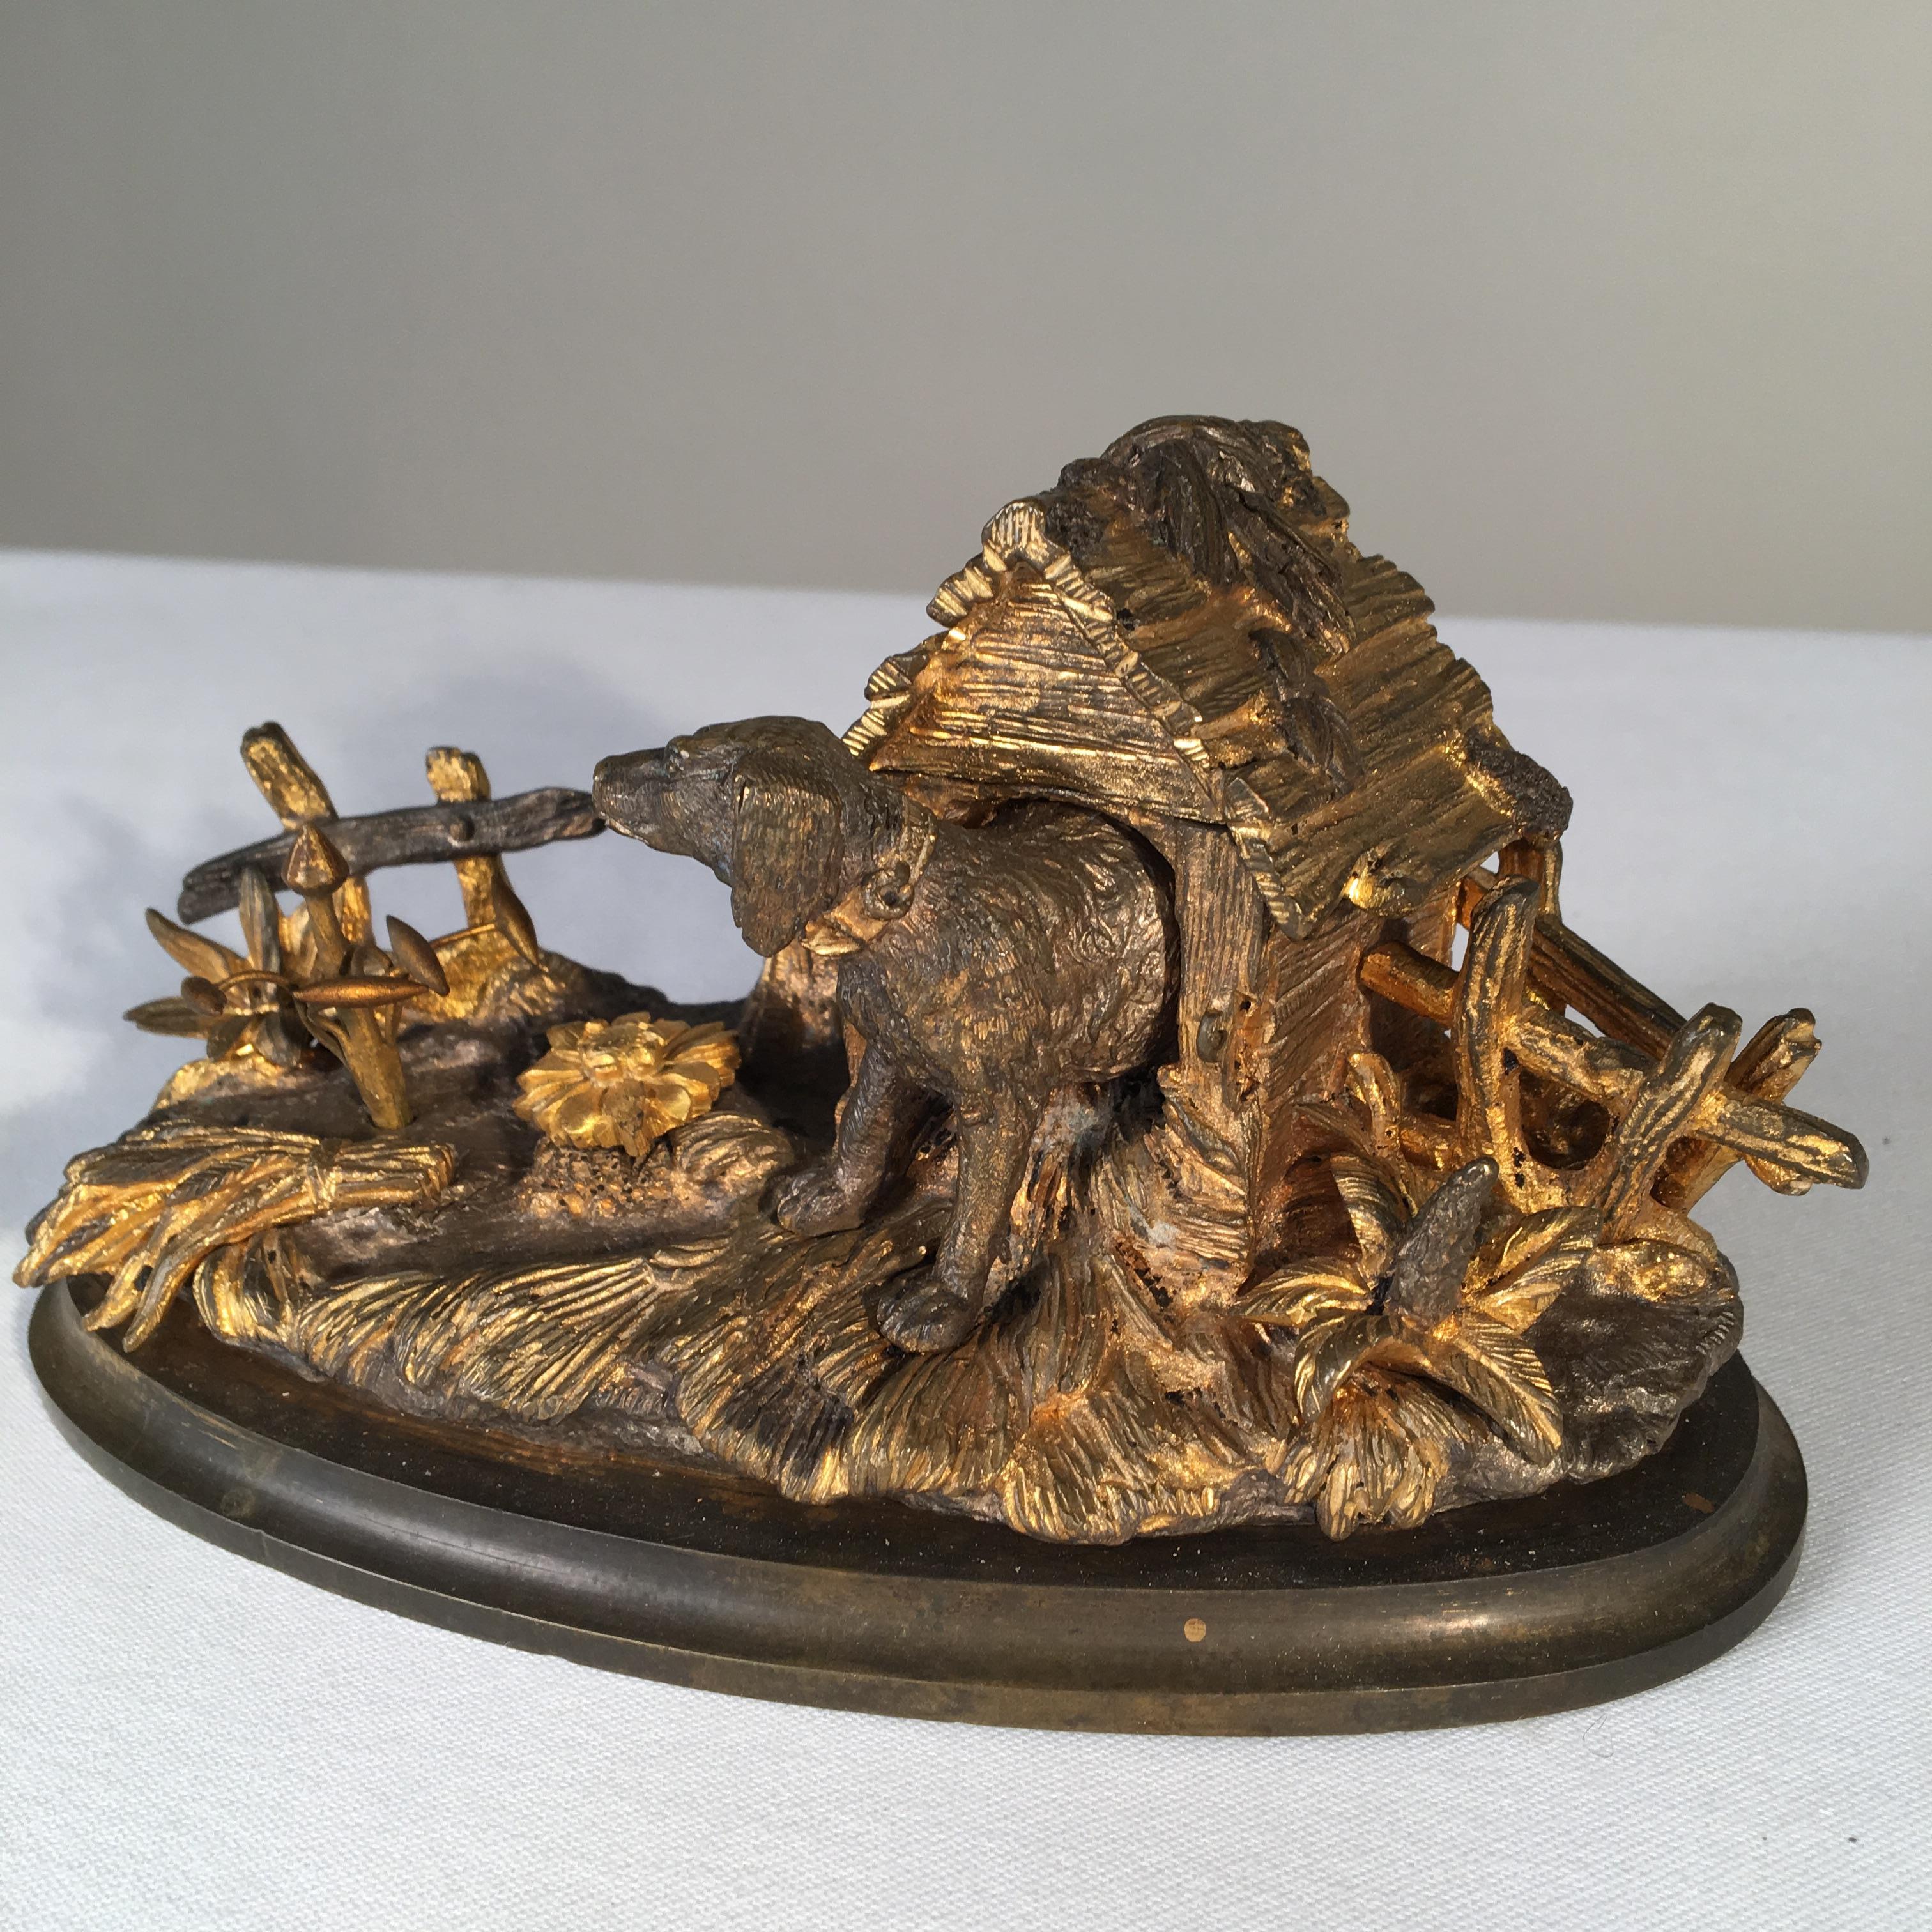 A charming French gilt bronze inkwell in the form of a dog house with the roof on a hinge to store the ink bottle.